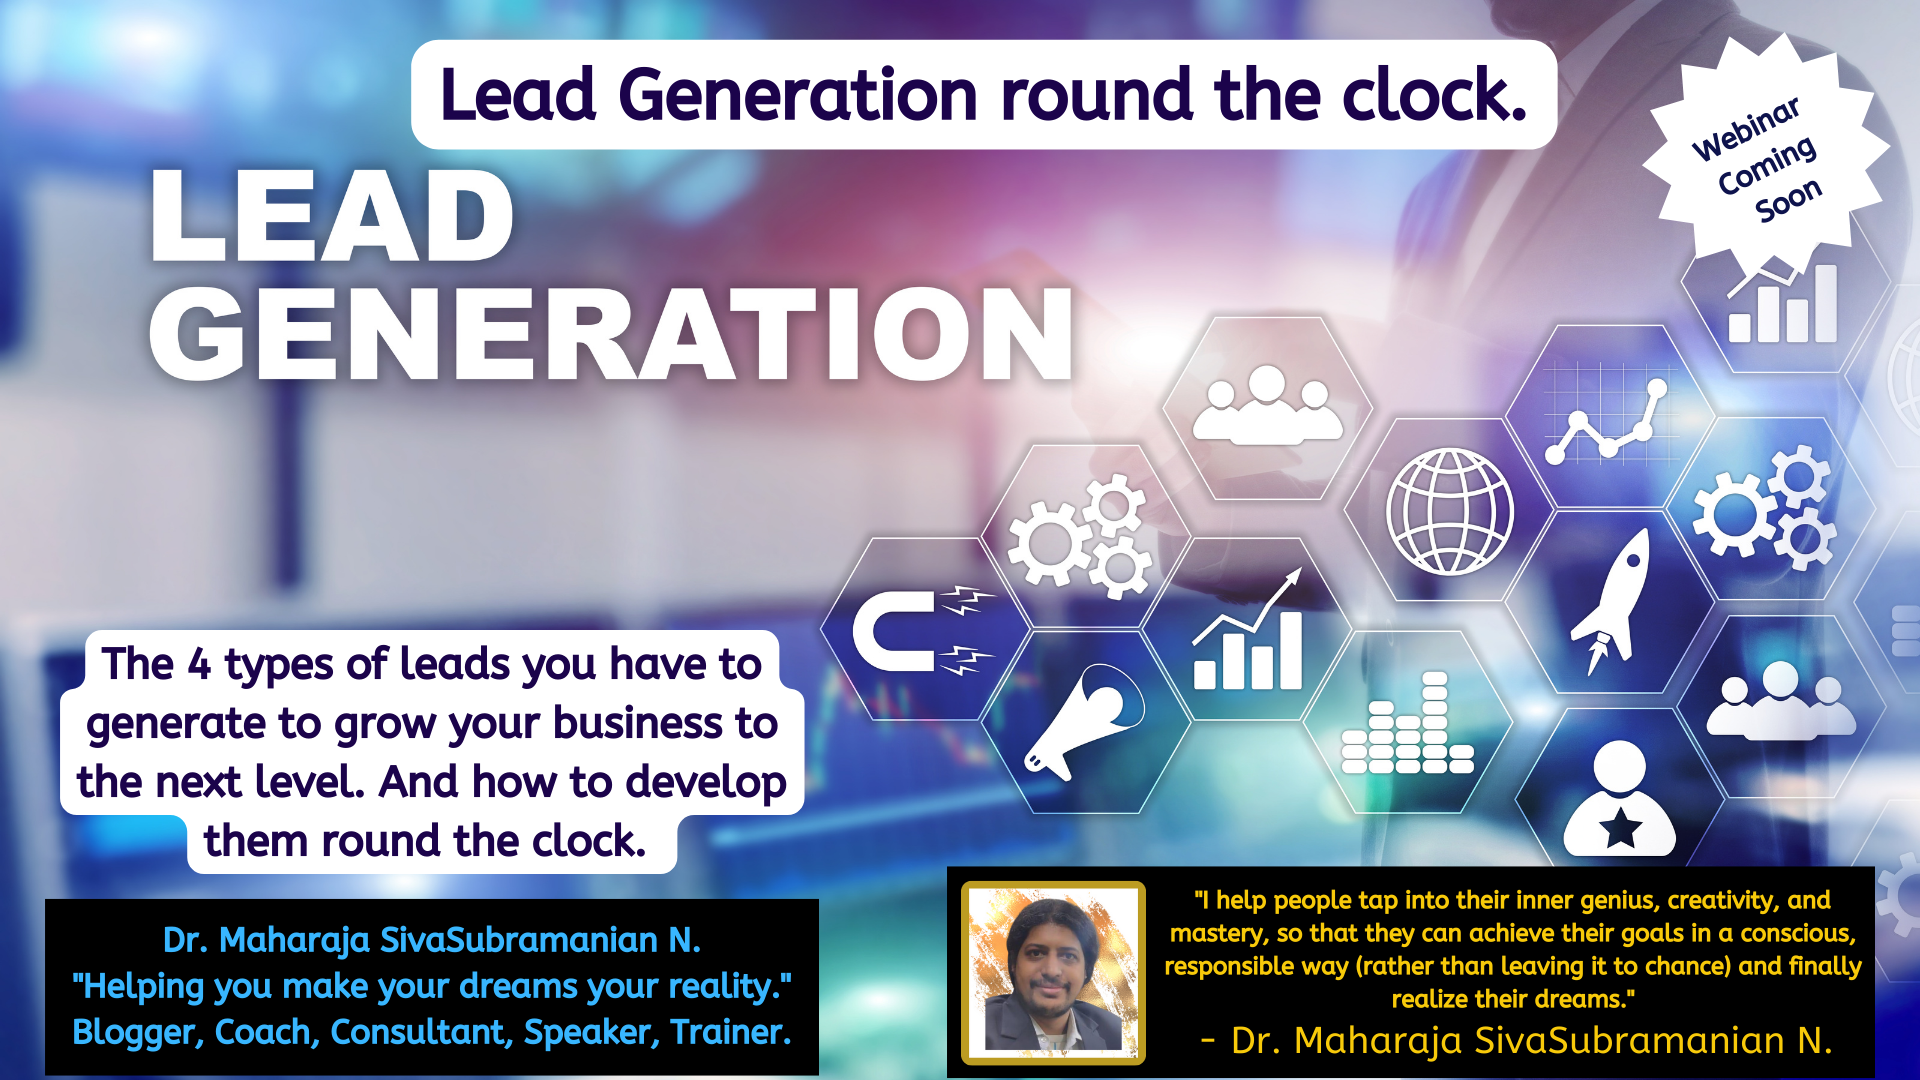 Lead Generation round the clock for productivity coaches. – Upcoming free webinar.